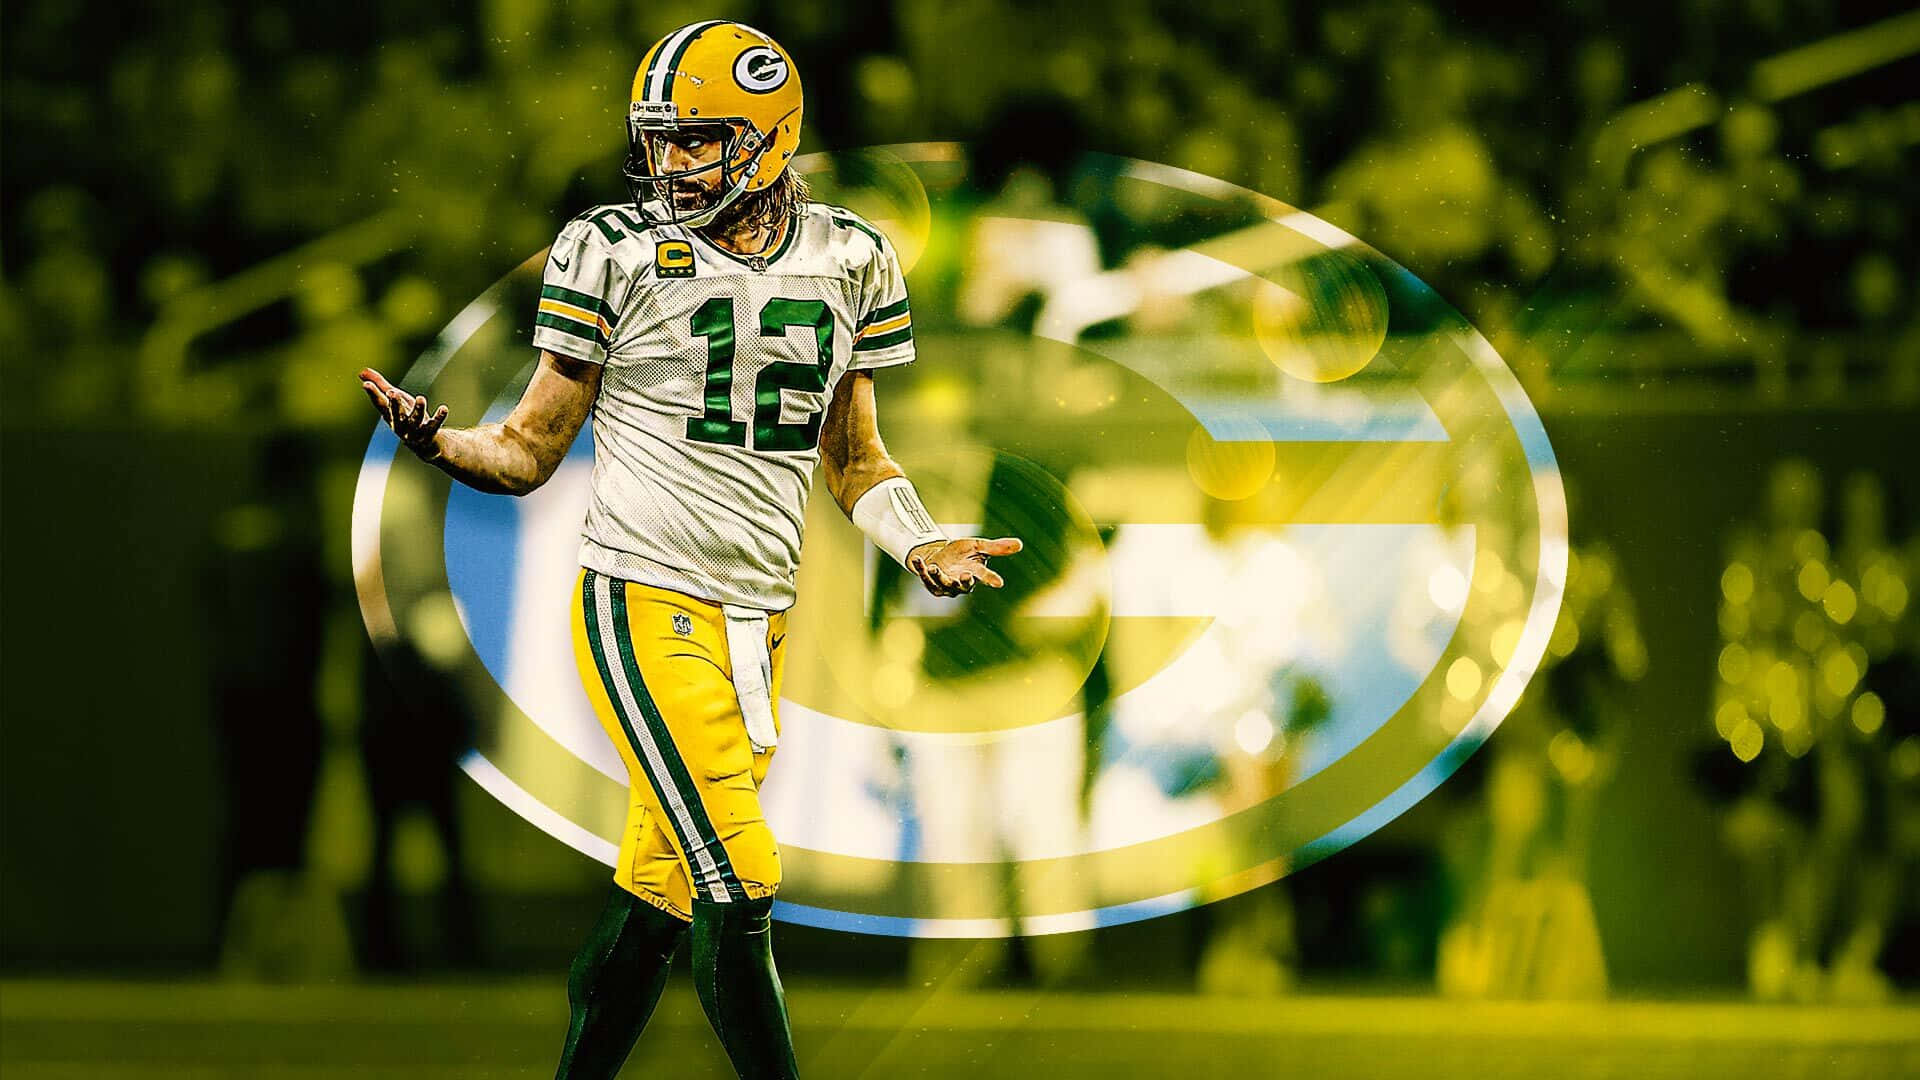 Aaron Rodgers, Premier Quarterback of the Green Bay Packers